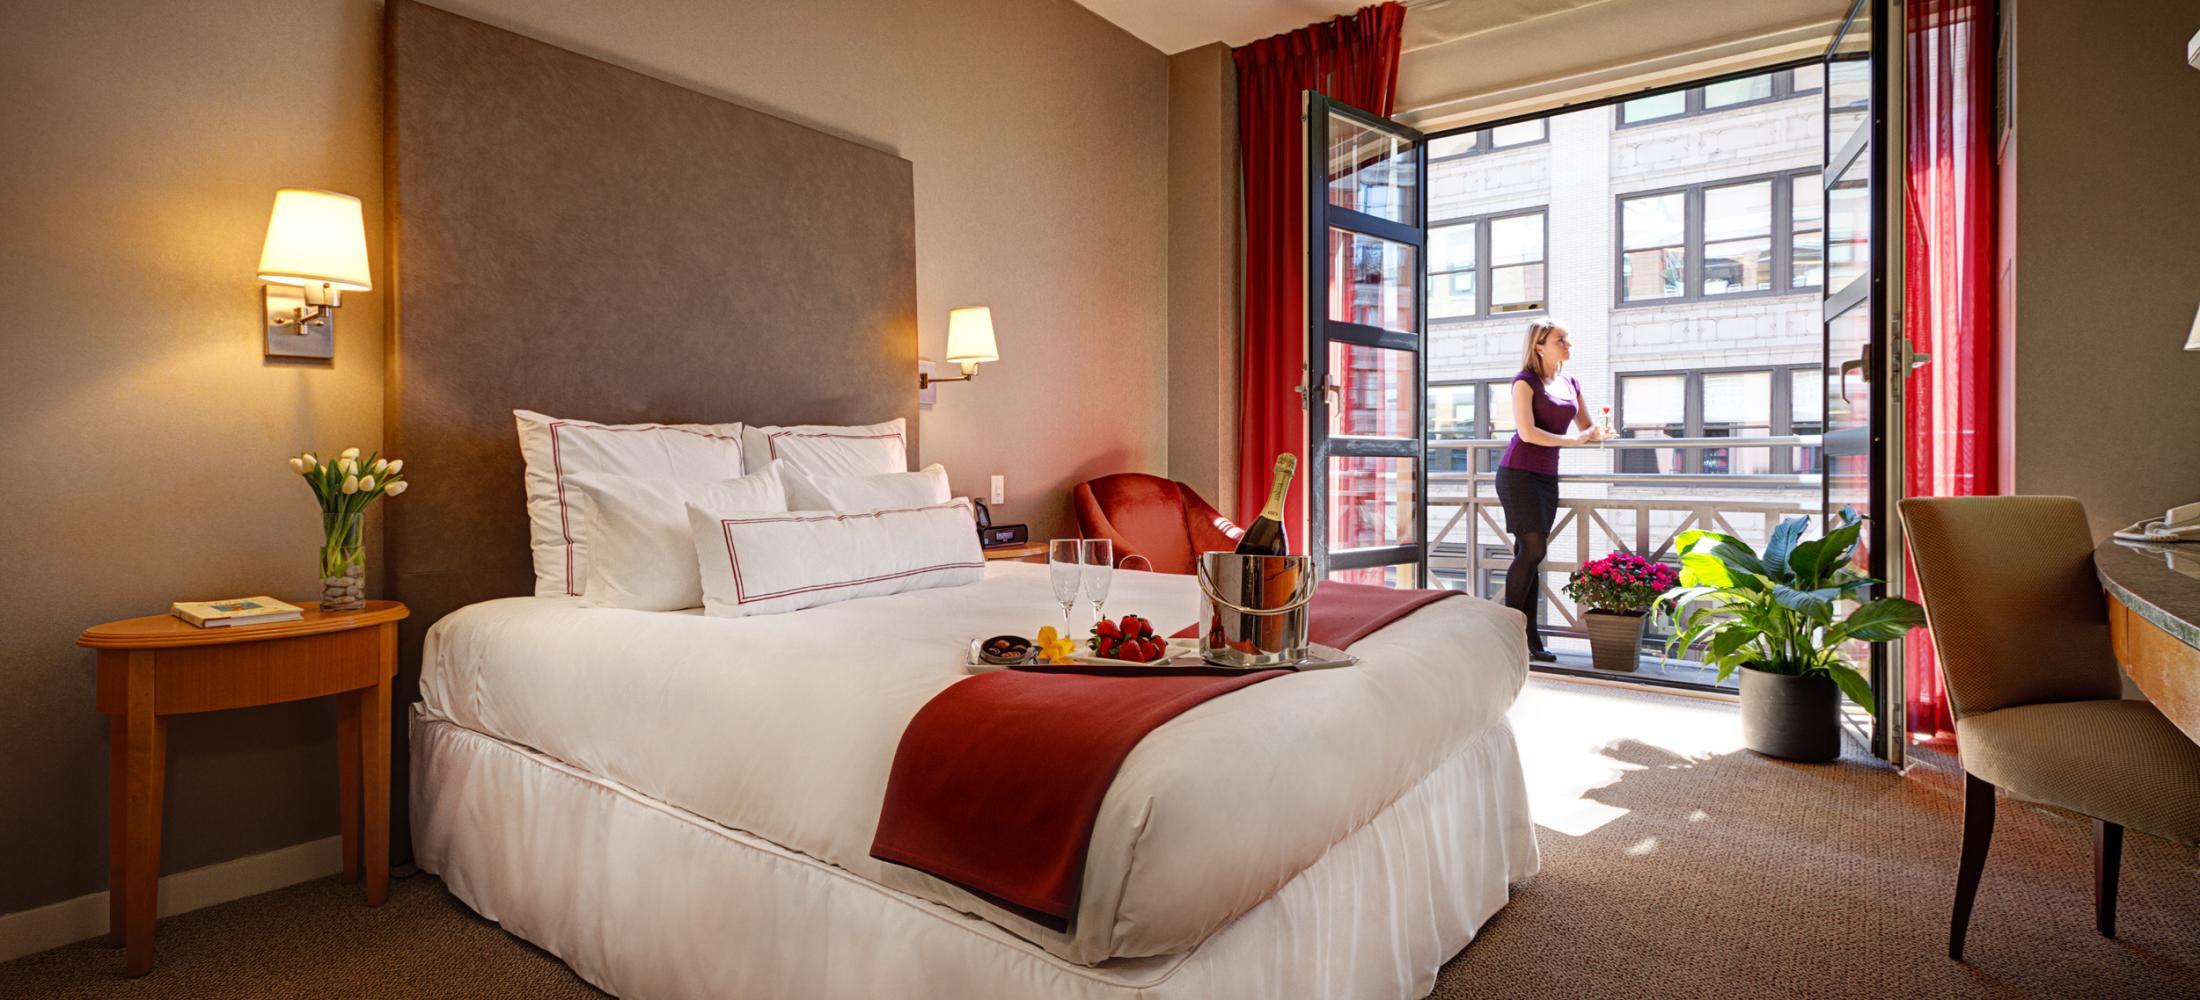 Our Guestroom with 1 Queen Bed is perfect for young couples who are ready to explore the city.